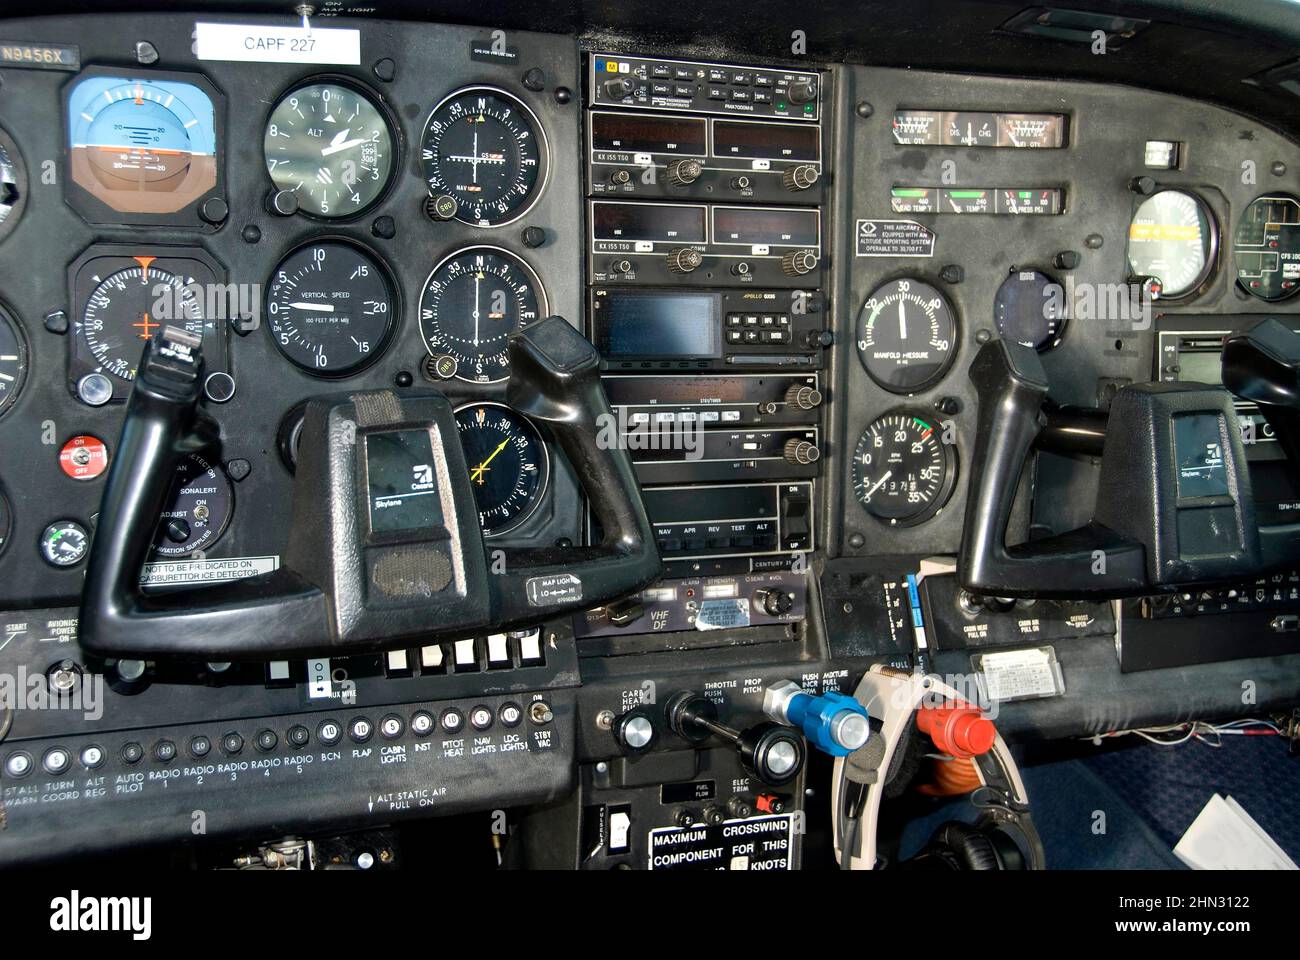 dashboard of an aircraft control panel showing all of the navigation gages, dials and other radio connectivity instruments Stock Photo